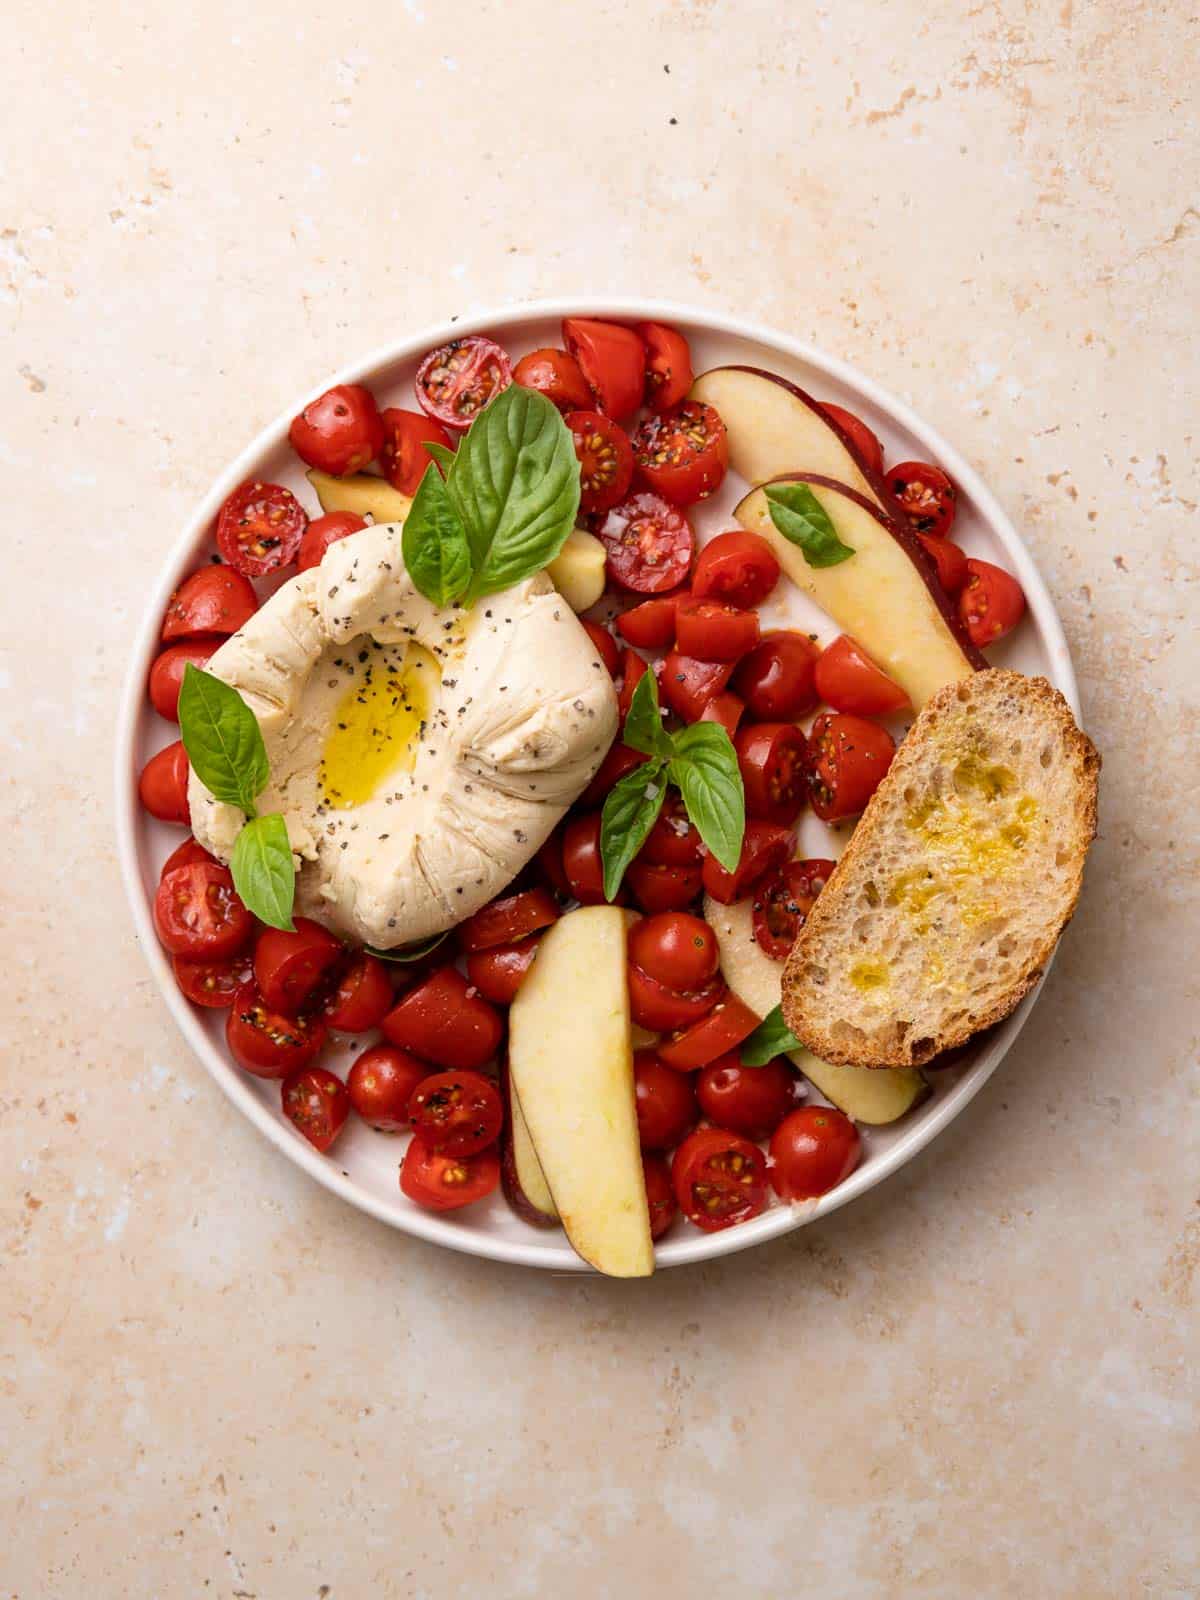 Vegan Burrata served on a round plate as a Caprese salad with cherry tomato, drizzles of olive oil, fresh basil, artisan bread, salt, pepper, and apple slices.